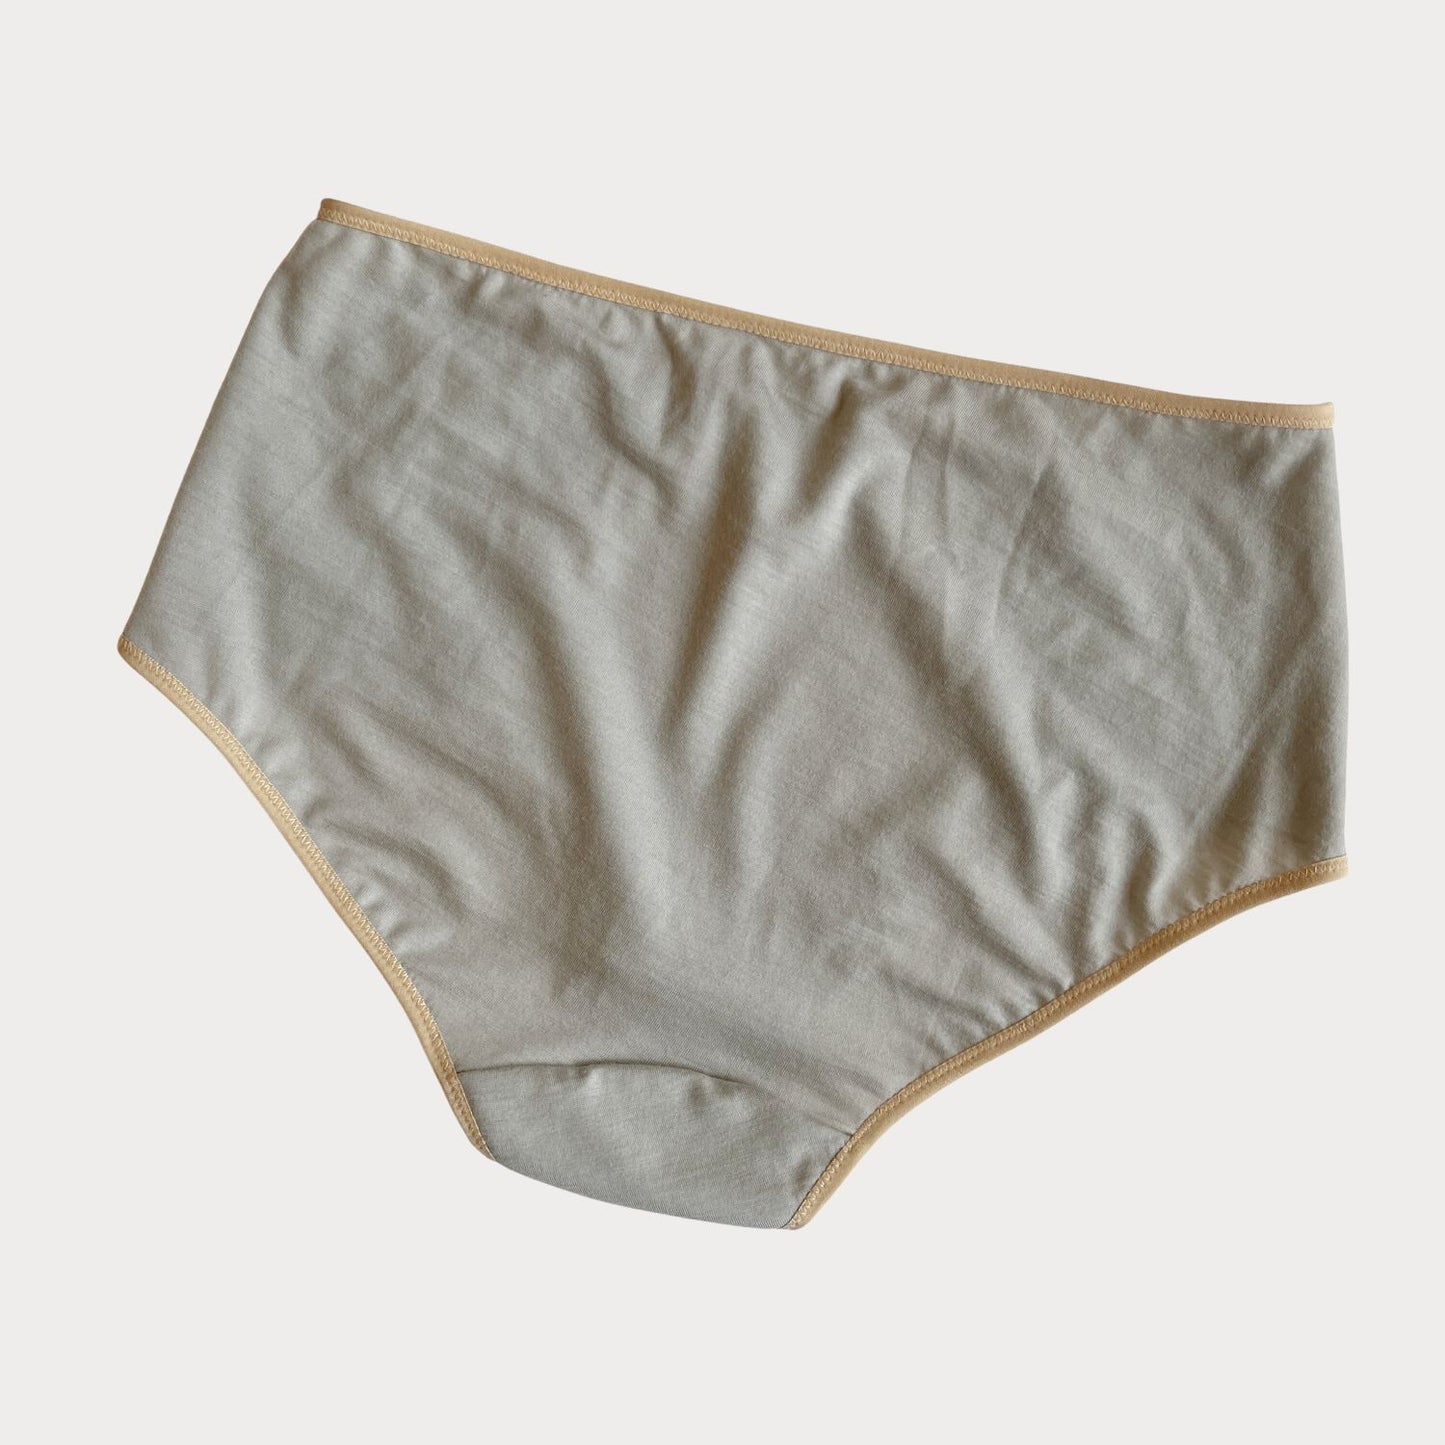 Merino wool hipster brief - made to order